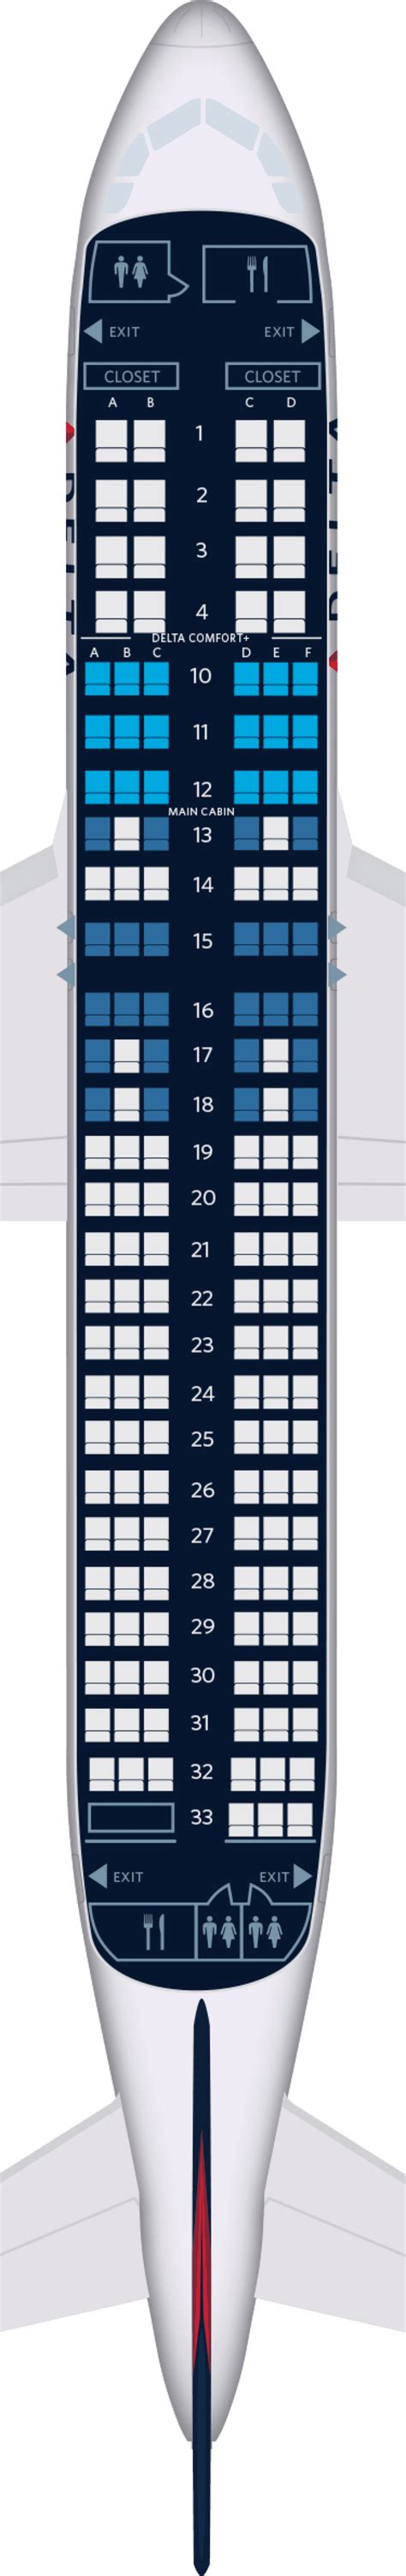 Airbus a320 seat layout. In-flight amenities. Air Arabia's A320 is a standard aircraft that can hold 174 passengers. This seat is the go to seat for persons like I who always suffer due to lack of legroom. Rows 1, 2,3 ,4 AS I KNOW SO FAR HAVE THE BEST LEGROOM.This seat gave me plenty of legroom to stretch out unlike my other flight where I was seated in row 15. 